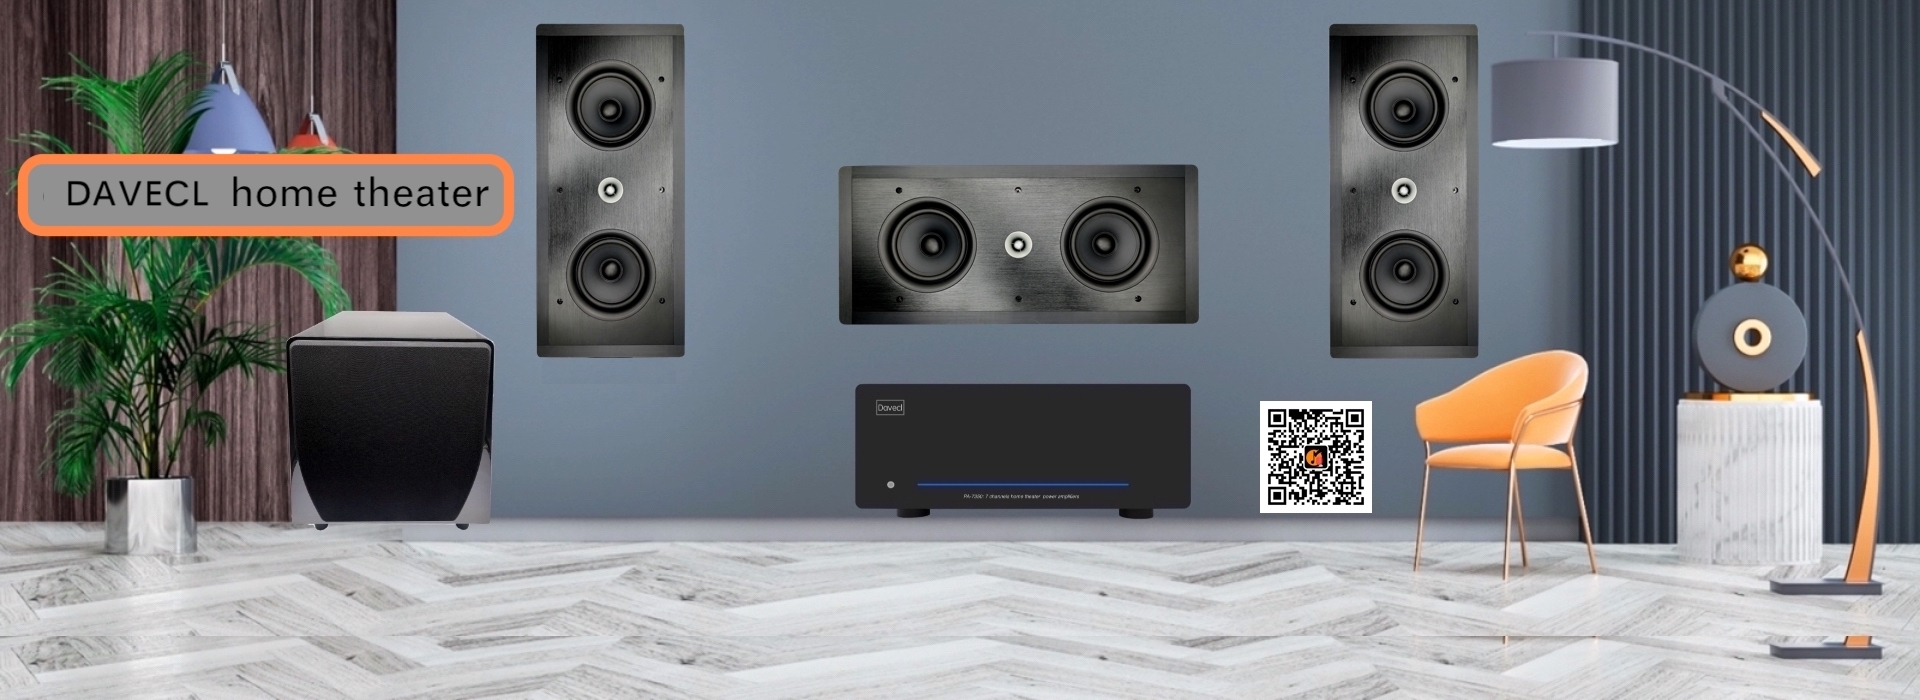 DAVECL AA7350 home theater system